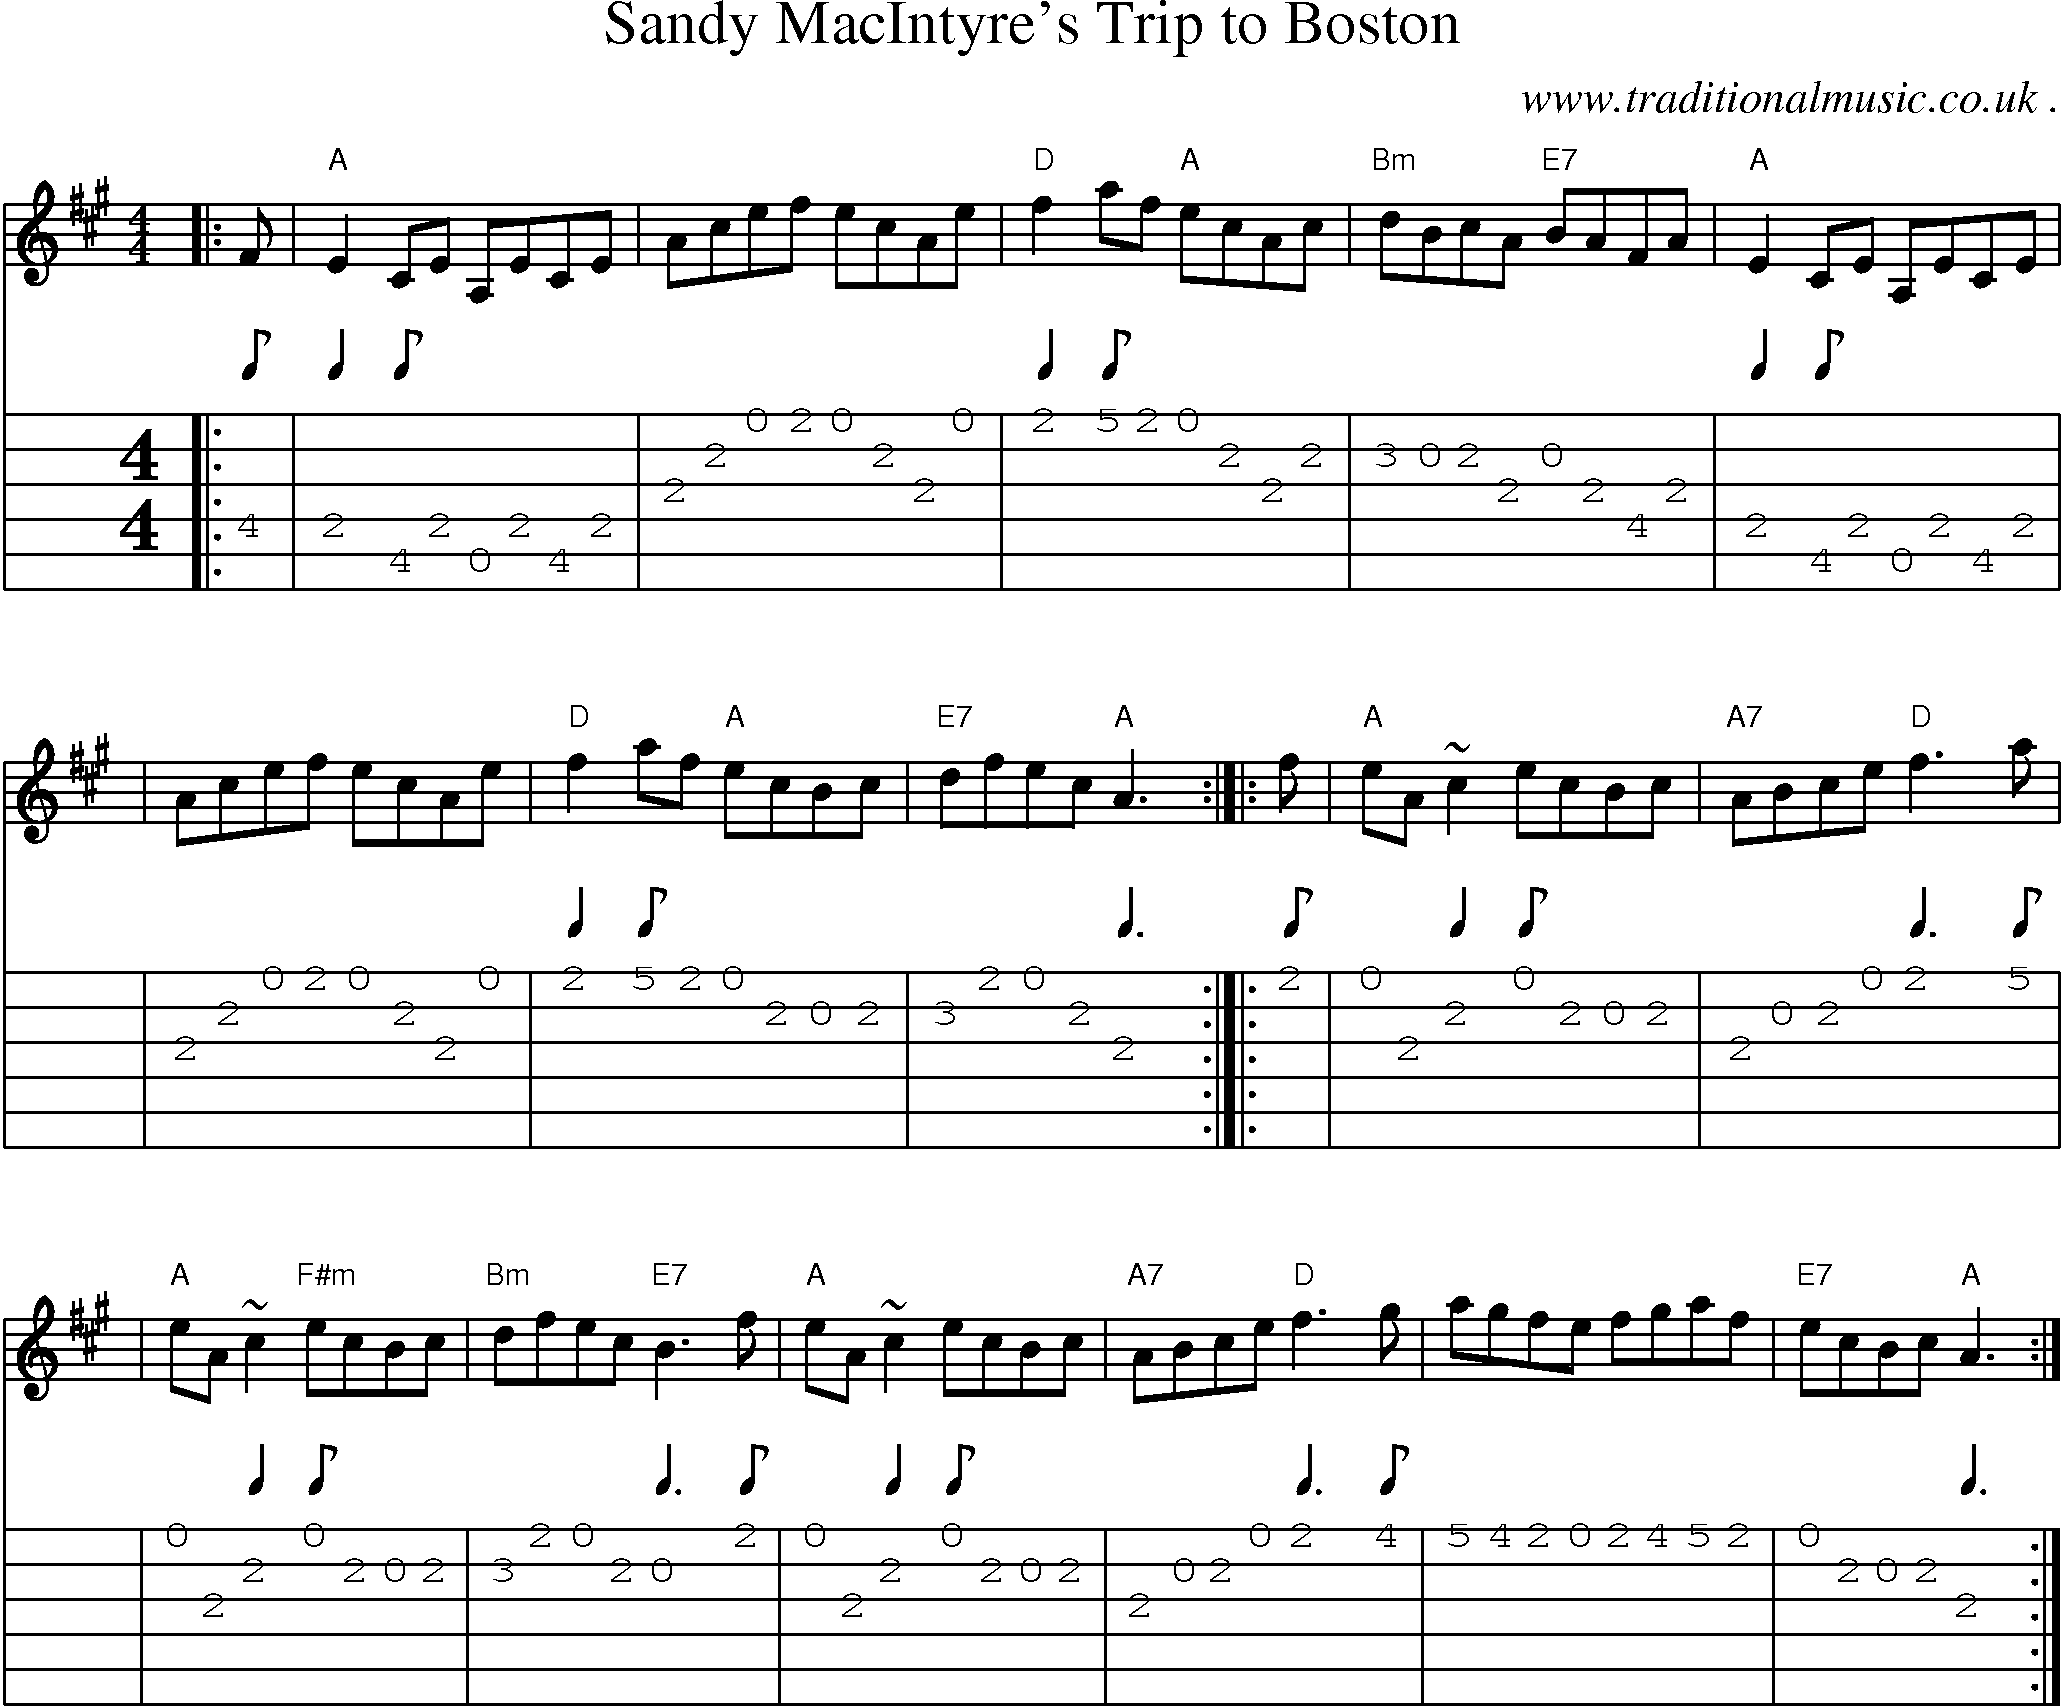 Sheet-music  score, Chords and Guitar Tabs for Sandy Macintyres Trip To Boston